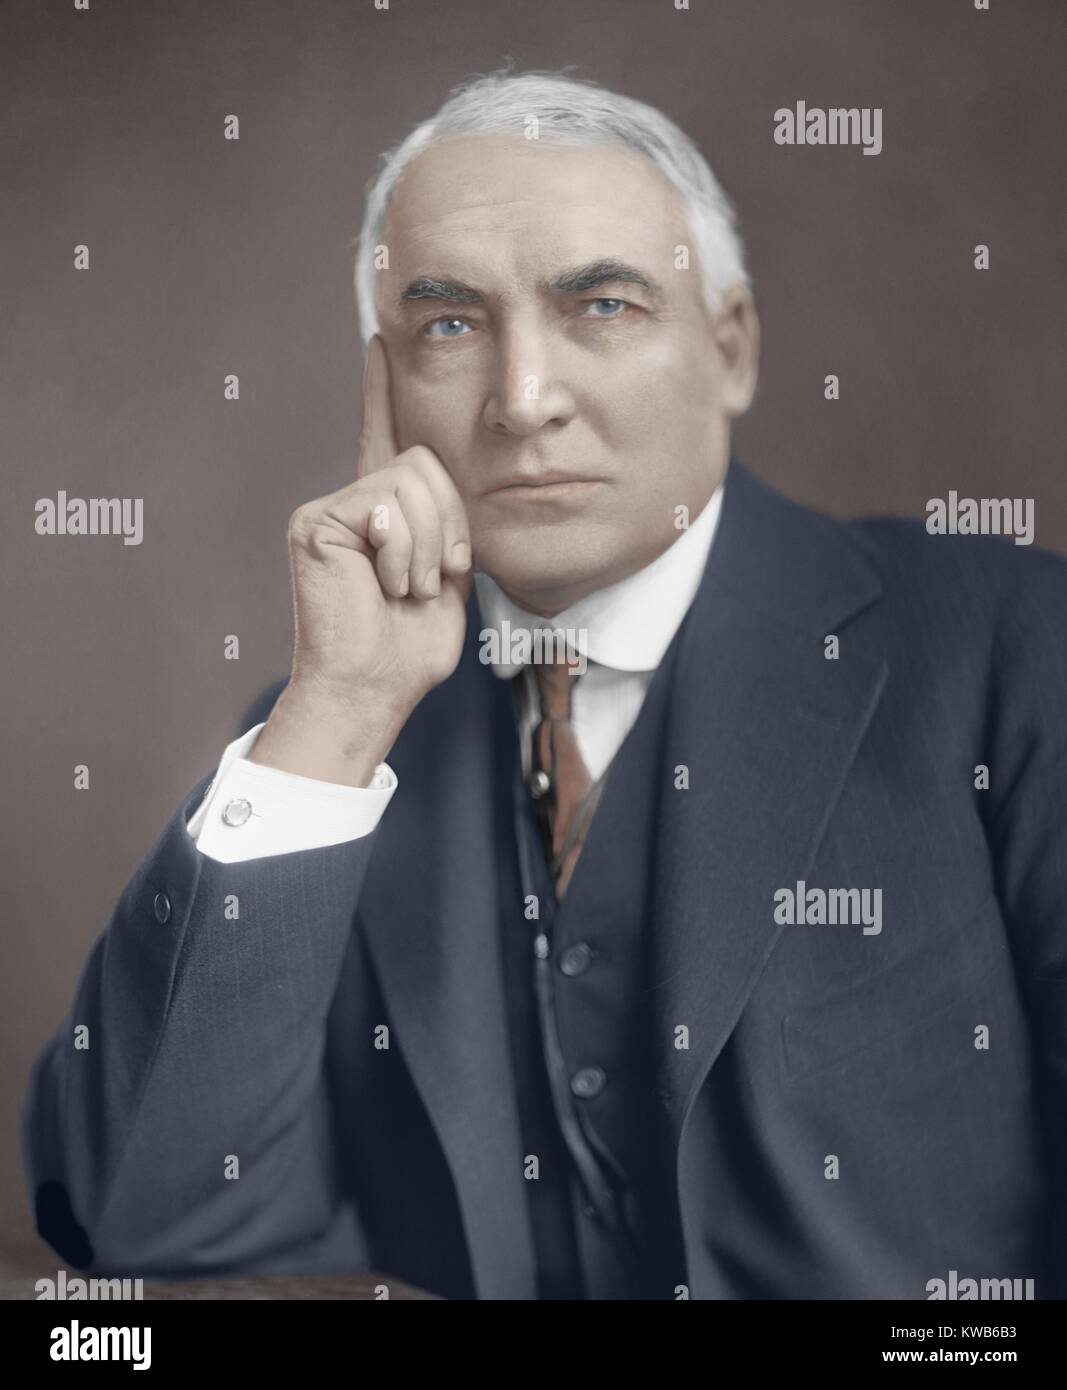 President Warren Harding, ca. 1921-23. He was President for less than two and half years when he died during a tour of Alaska and the Western states on August 2, 1923. Studio portrait with digital color (BSIC 2016 9 11). 7 Continents History/Everett Collection Stock Photo